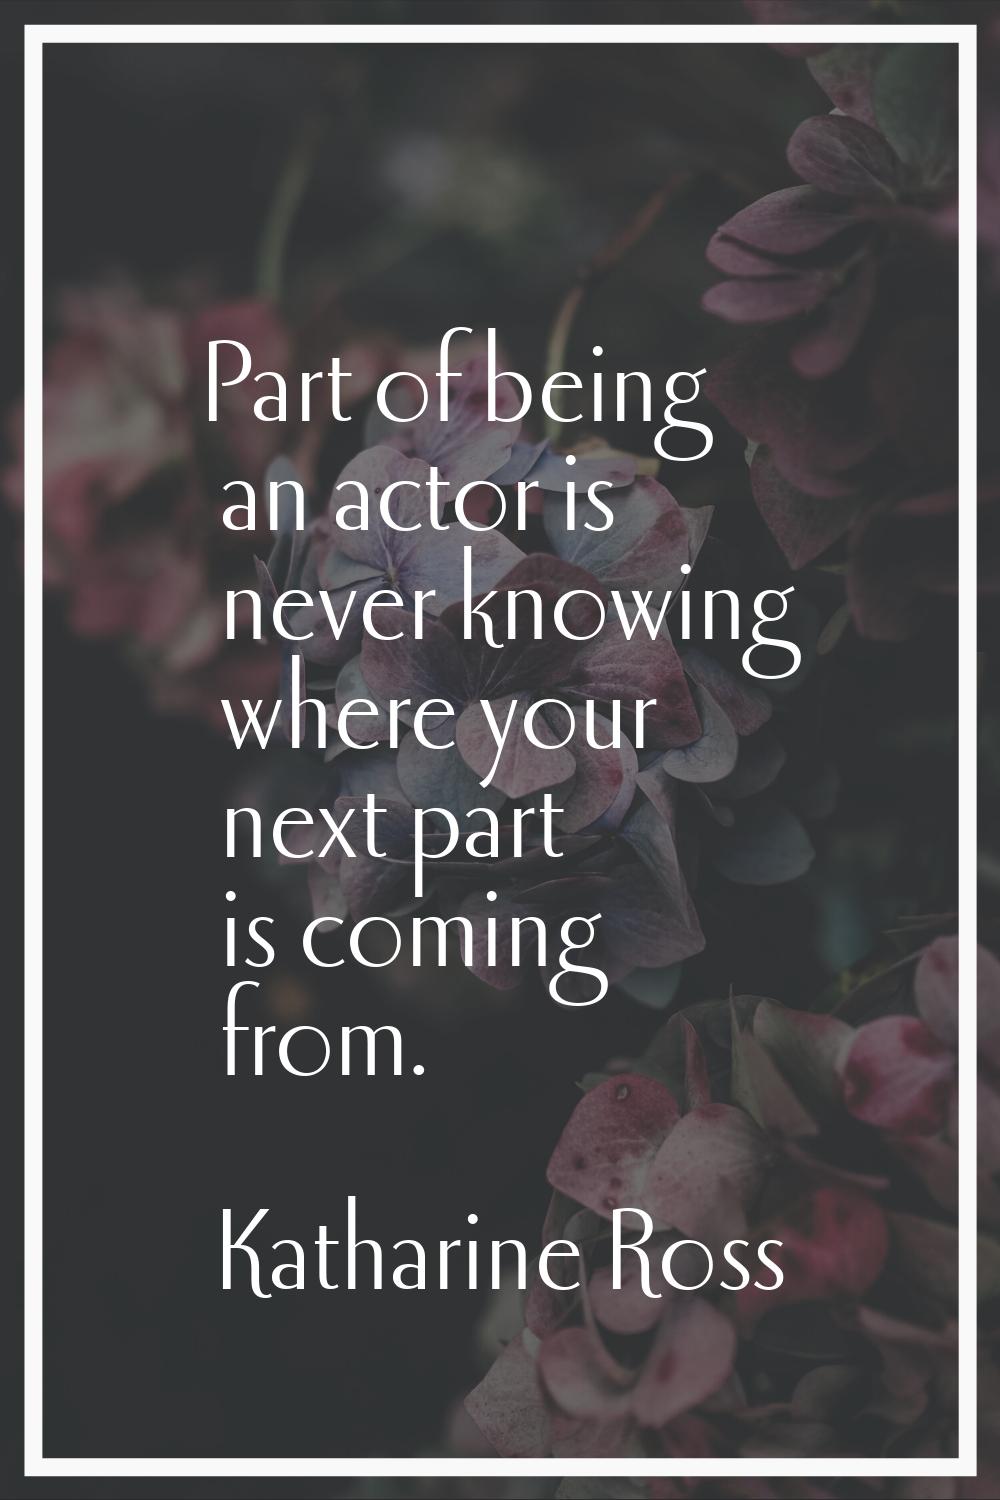 Part of being an actor is never knowing where your next part is coming from.